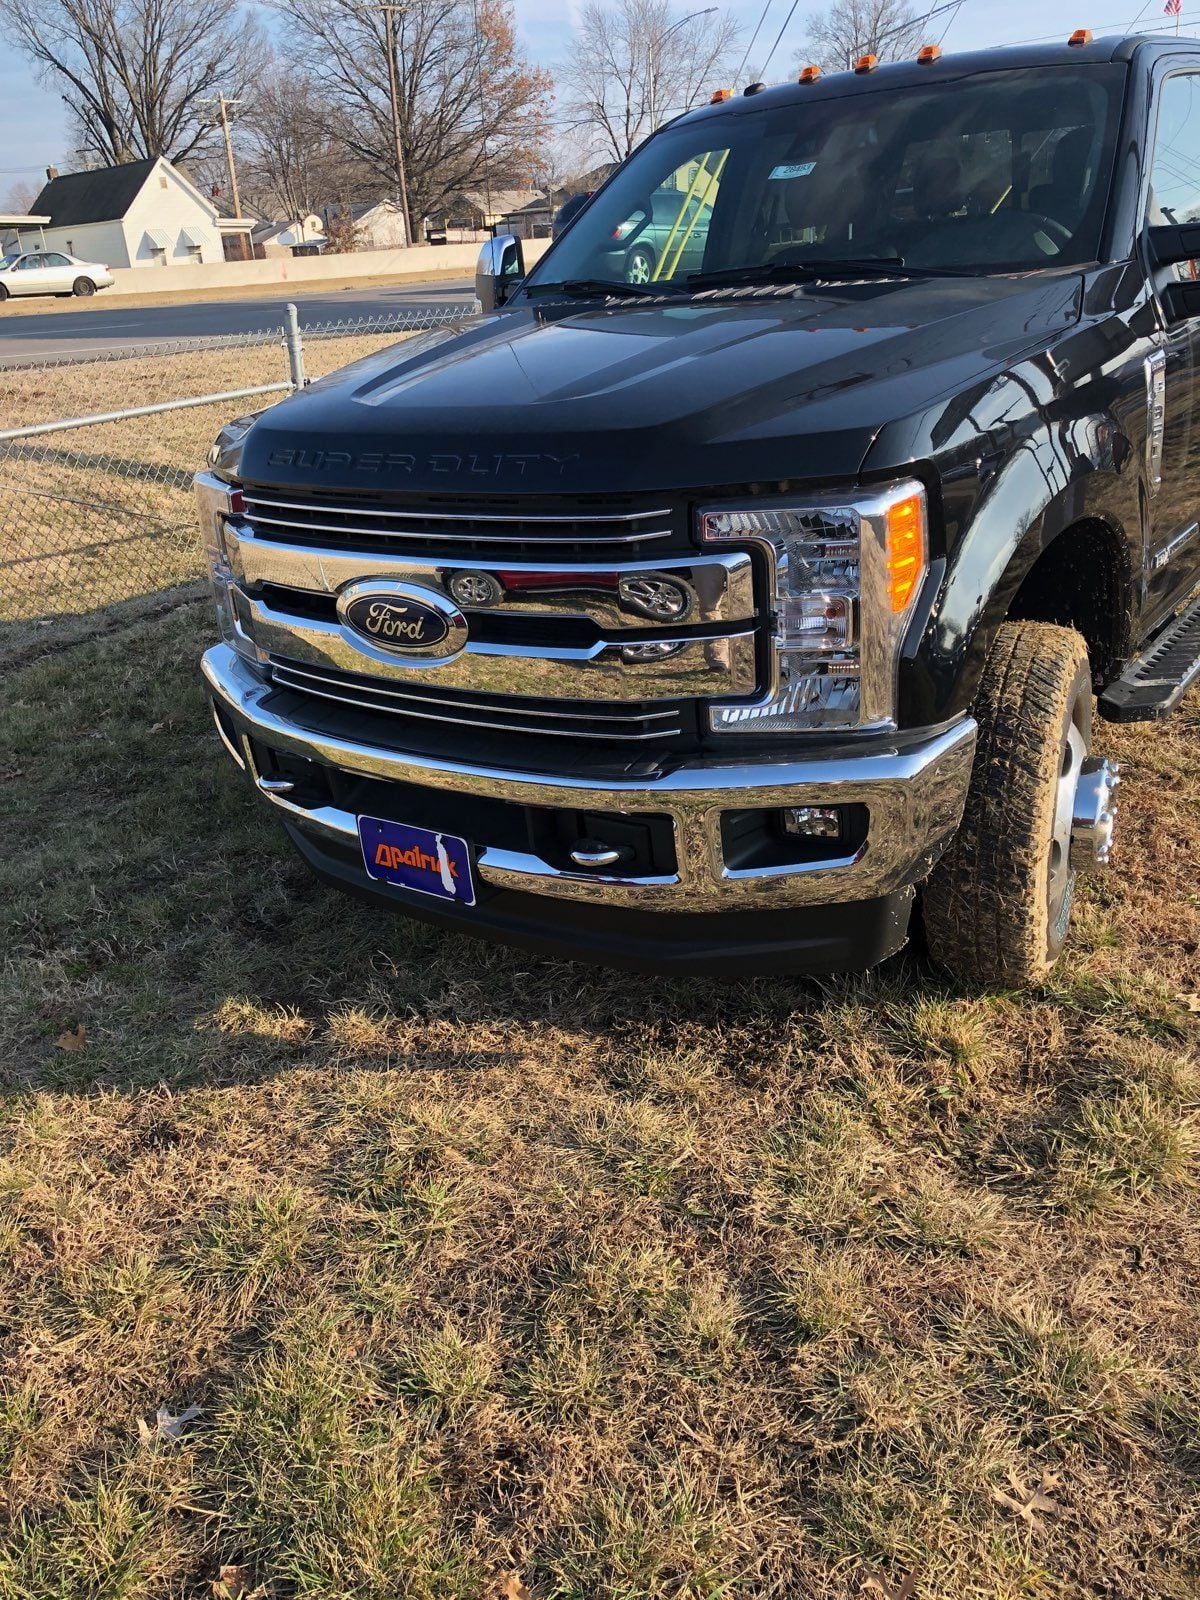 Lights - 2017+ Superduty Headlights/Foglights/Taillights - Used - 2017 to 2019 Ford F-350 Super Duty - West Palm Beach, FL 33407, United States